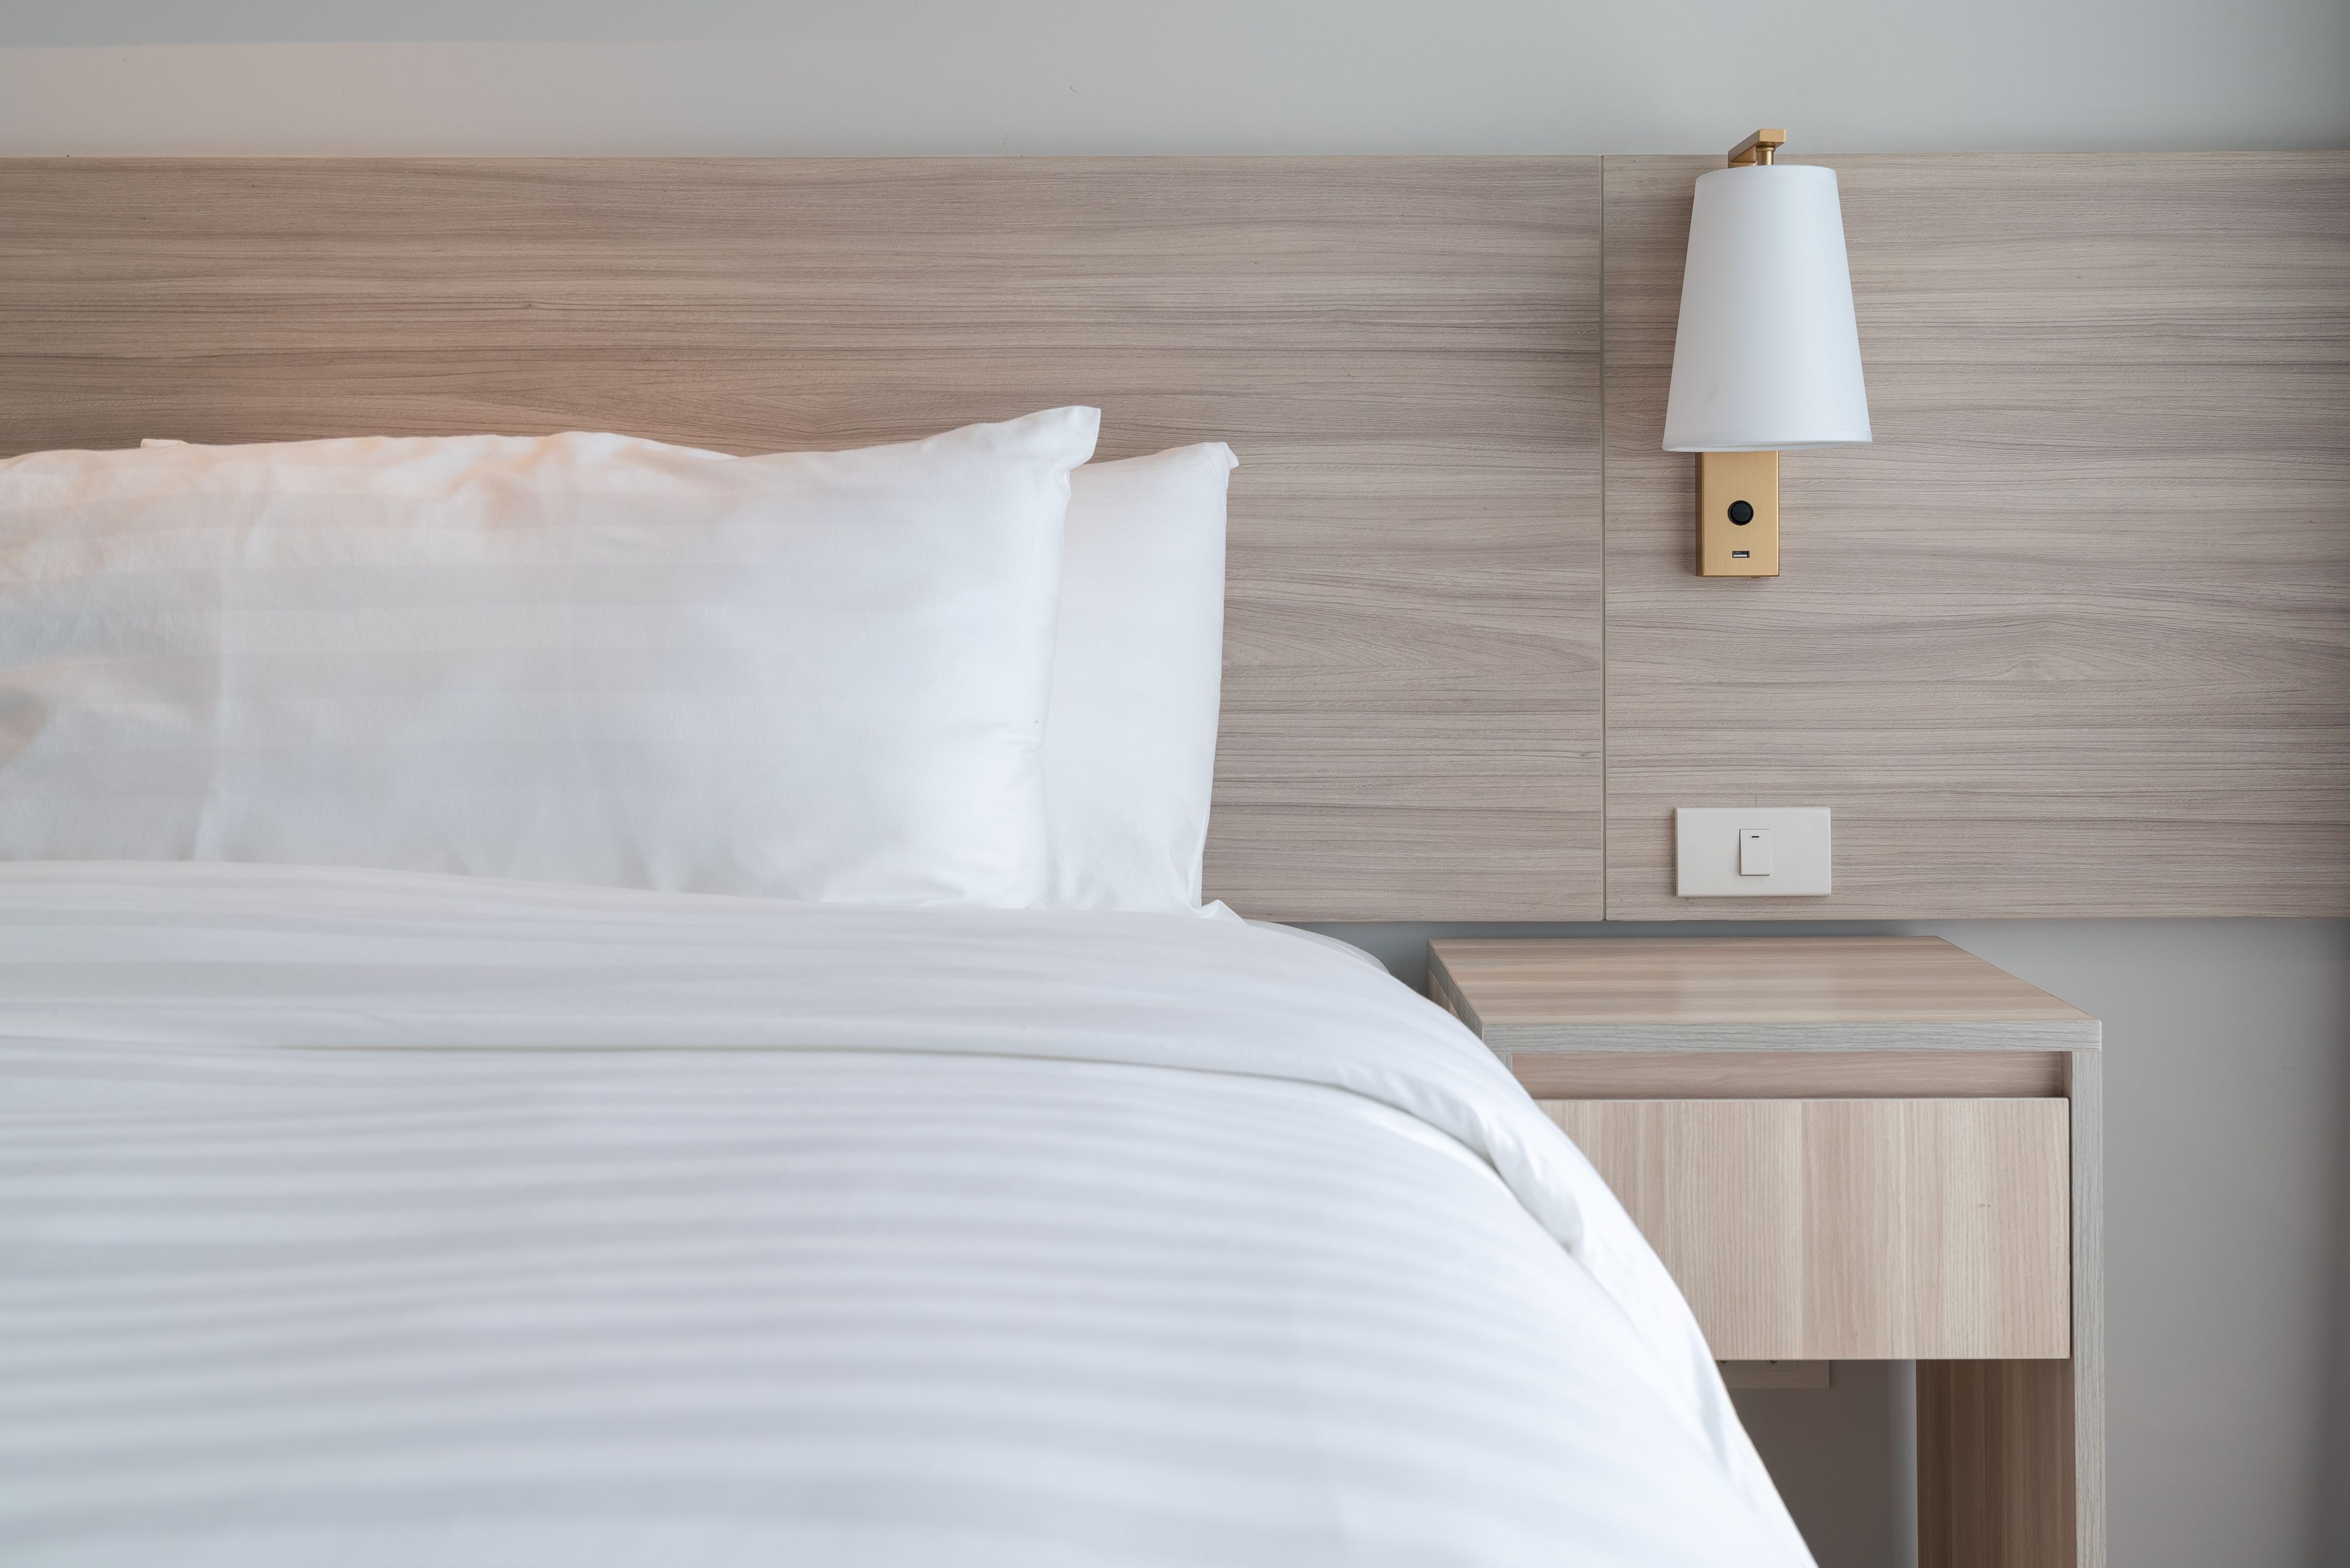 Hotel room with bed, wall sconce and nightstand